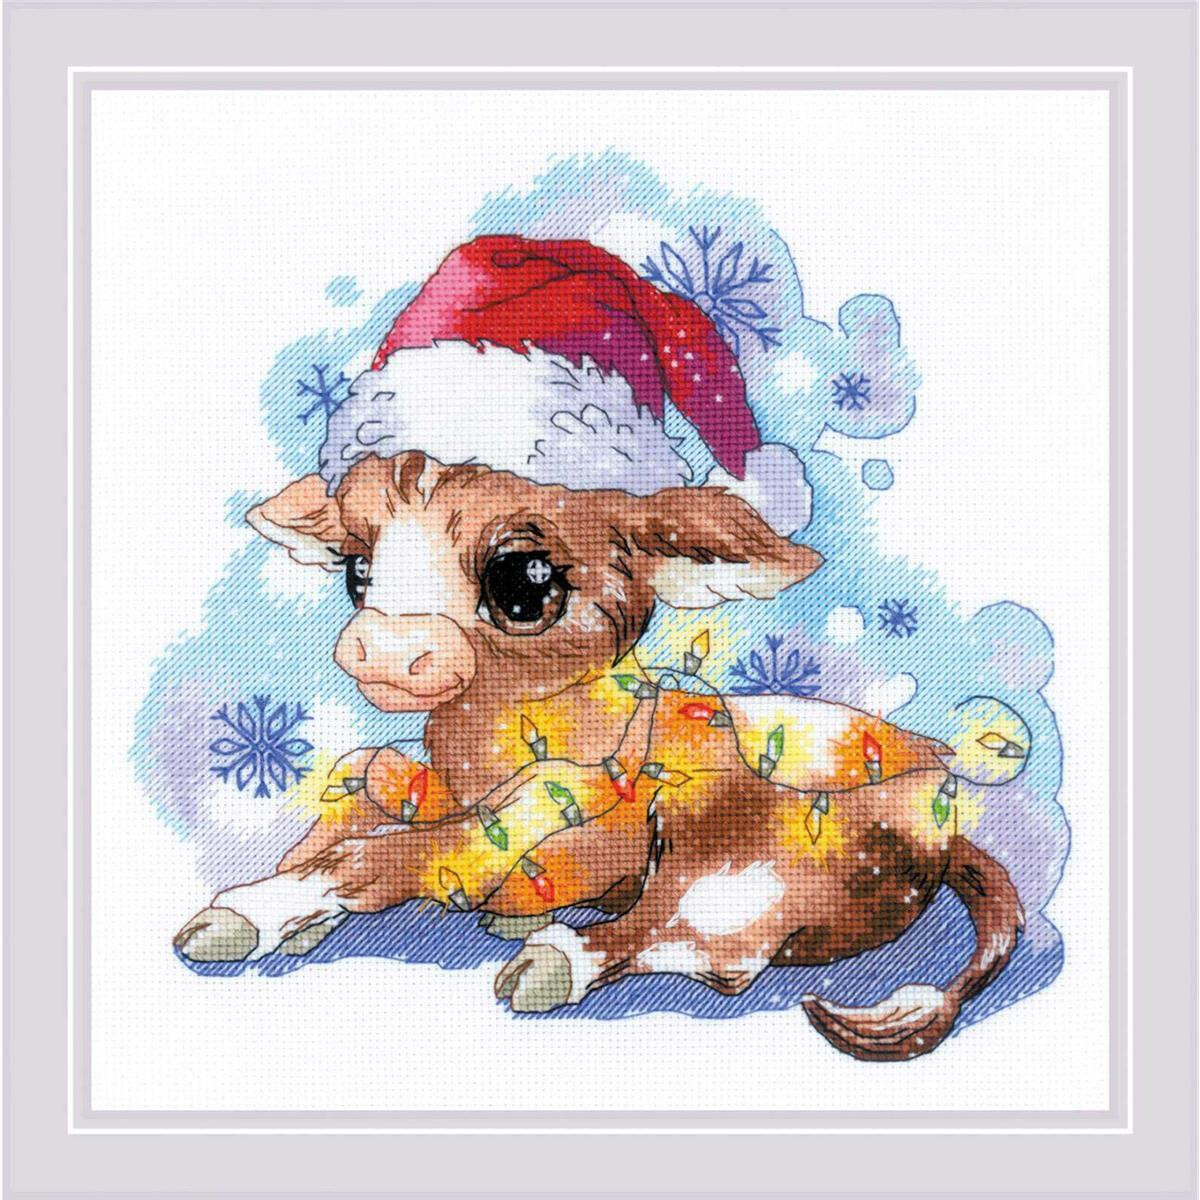 Riolis counted cross stitch kit "New Years...